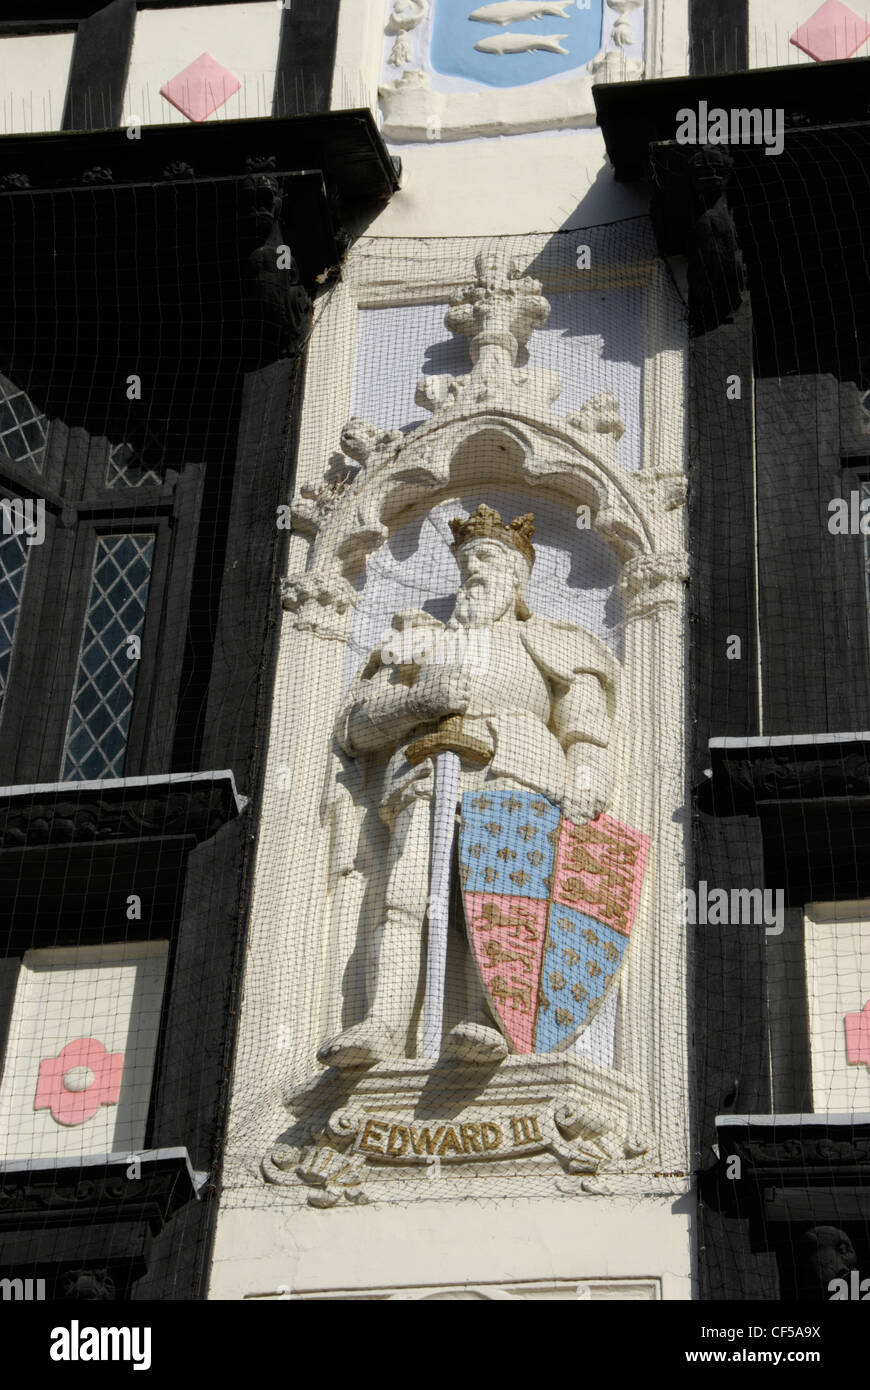 A Statue of Edward III on a mock Tudor exterior of Next department store building in Kingston. Stock Photo